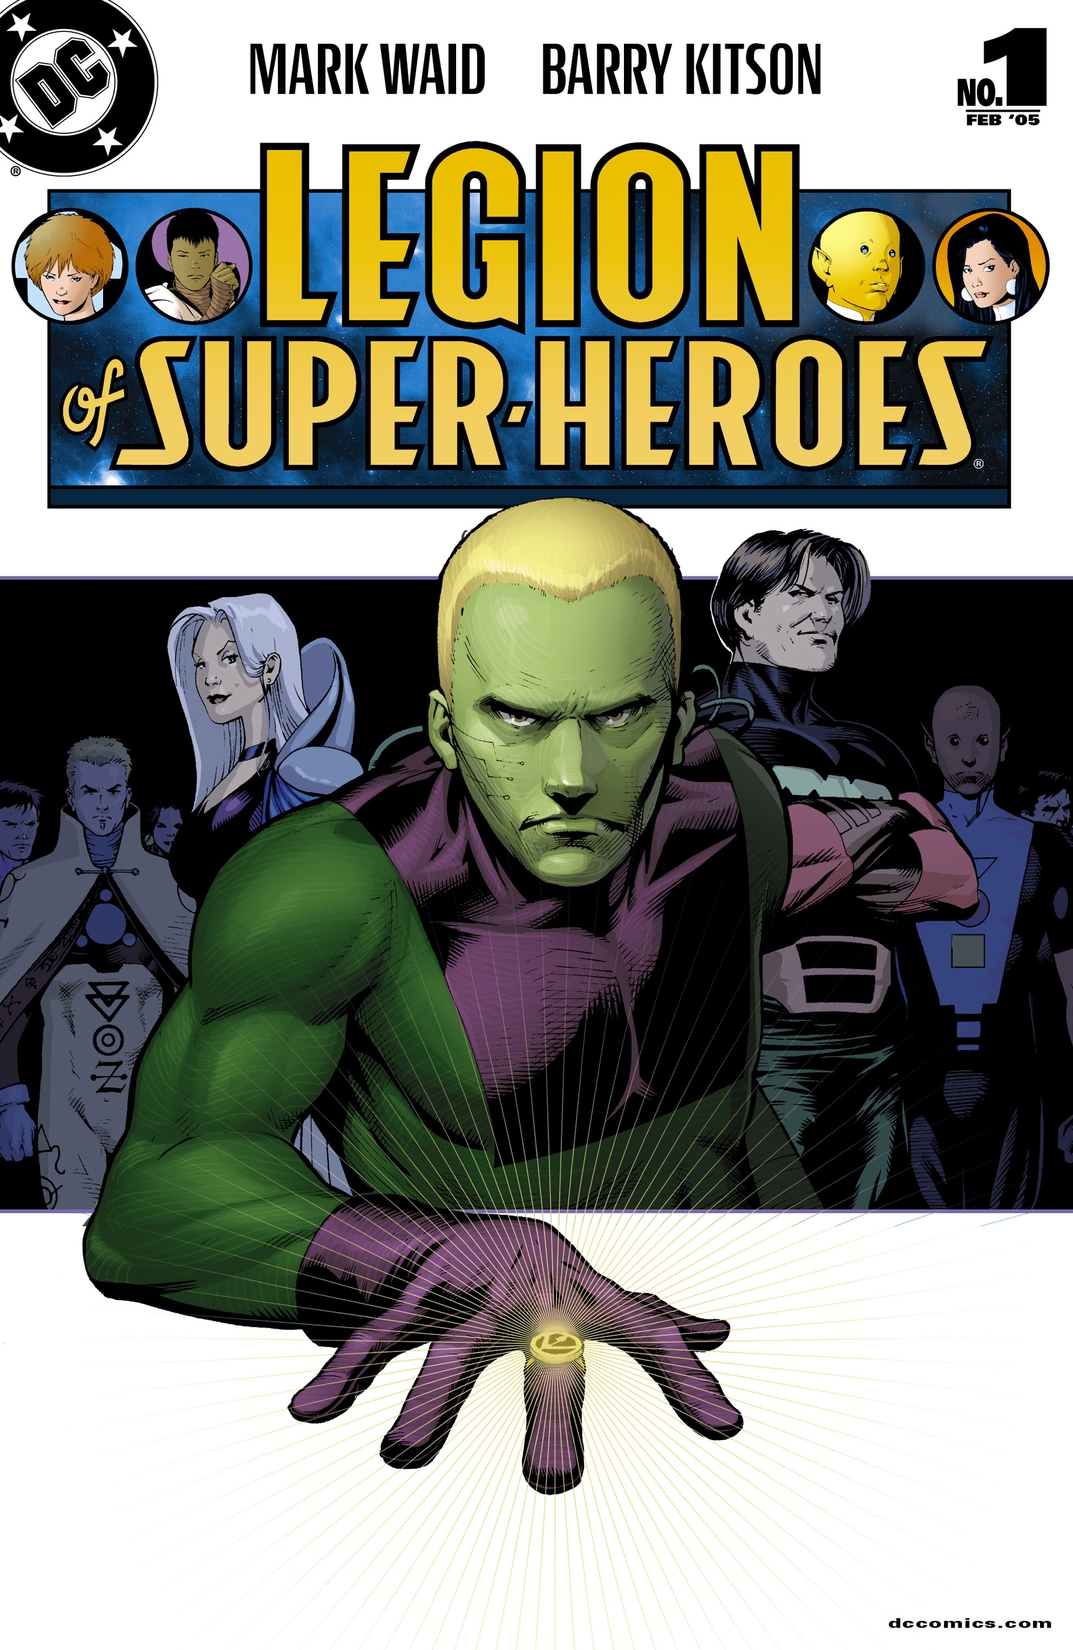 Legion of Super Heroes (2004-) #1 preview images